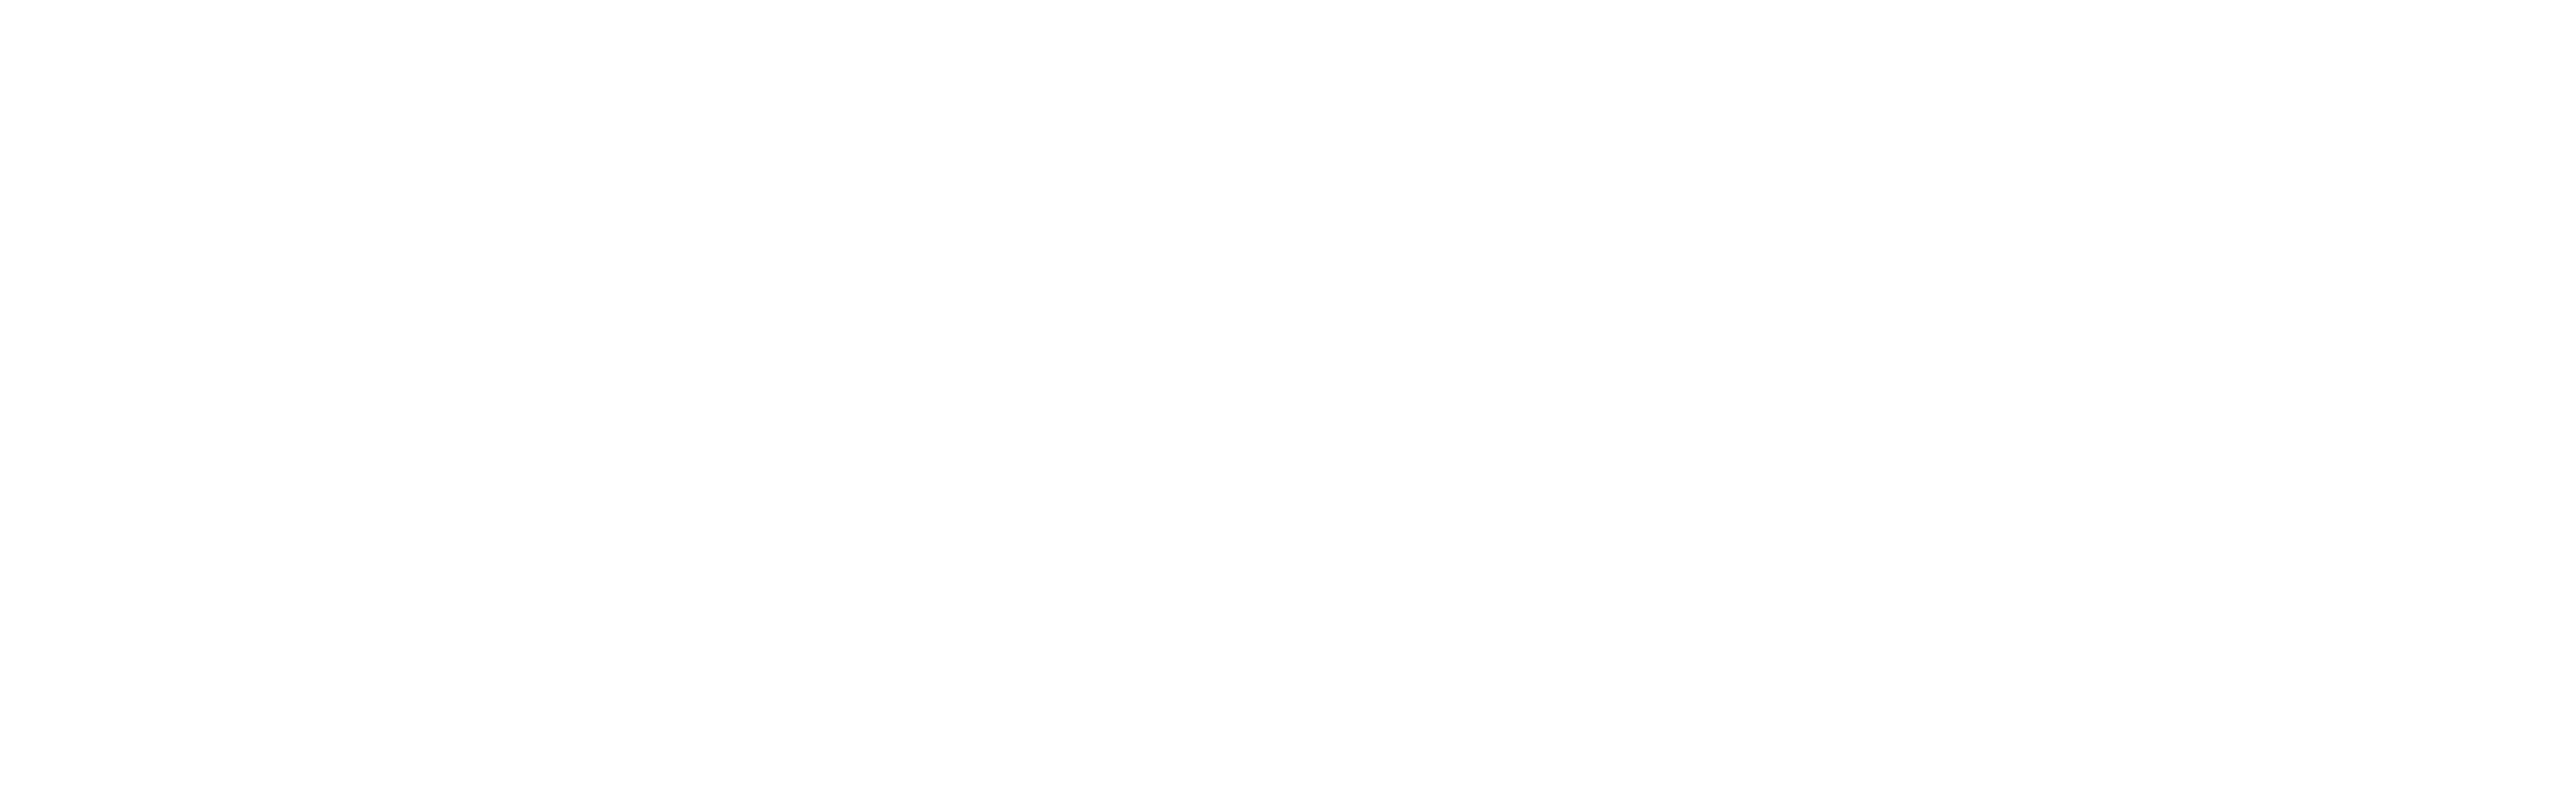 A black and white logo of HOTEL STADT HAMBURG and WESTERLAND / SYLT